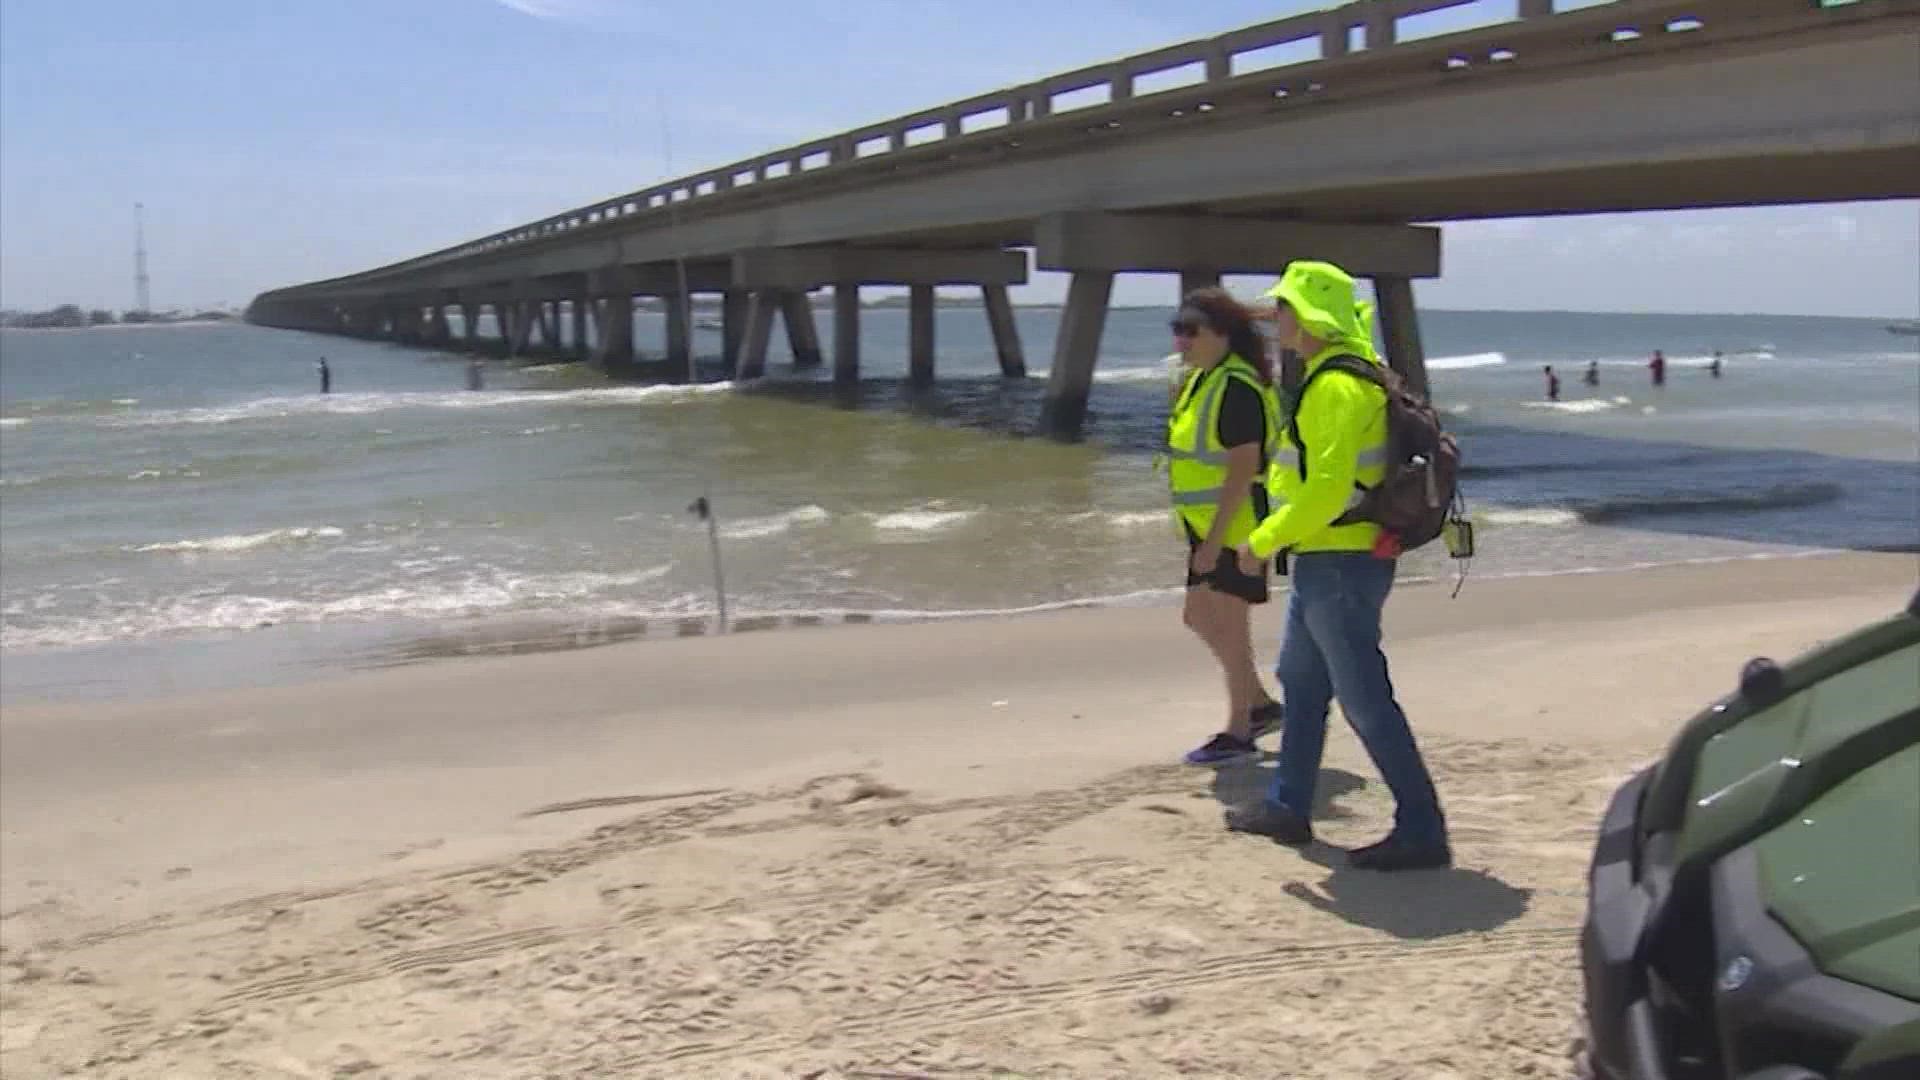 The Coast Guard helped find the body of the teen who went missing while wade fishing Saturday near the San Luis Pass bridge between Galveston and Brazoria County.